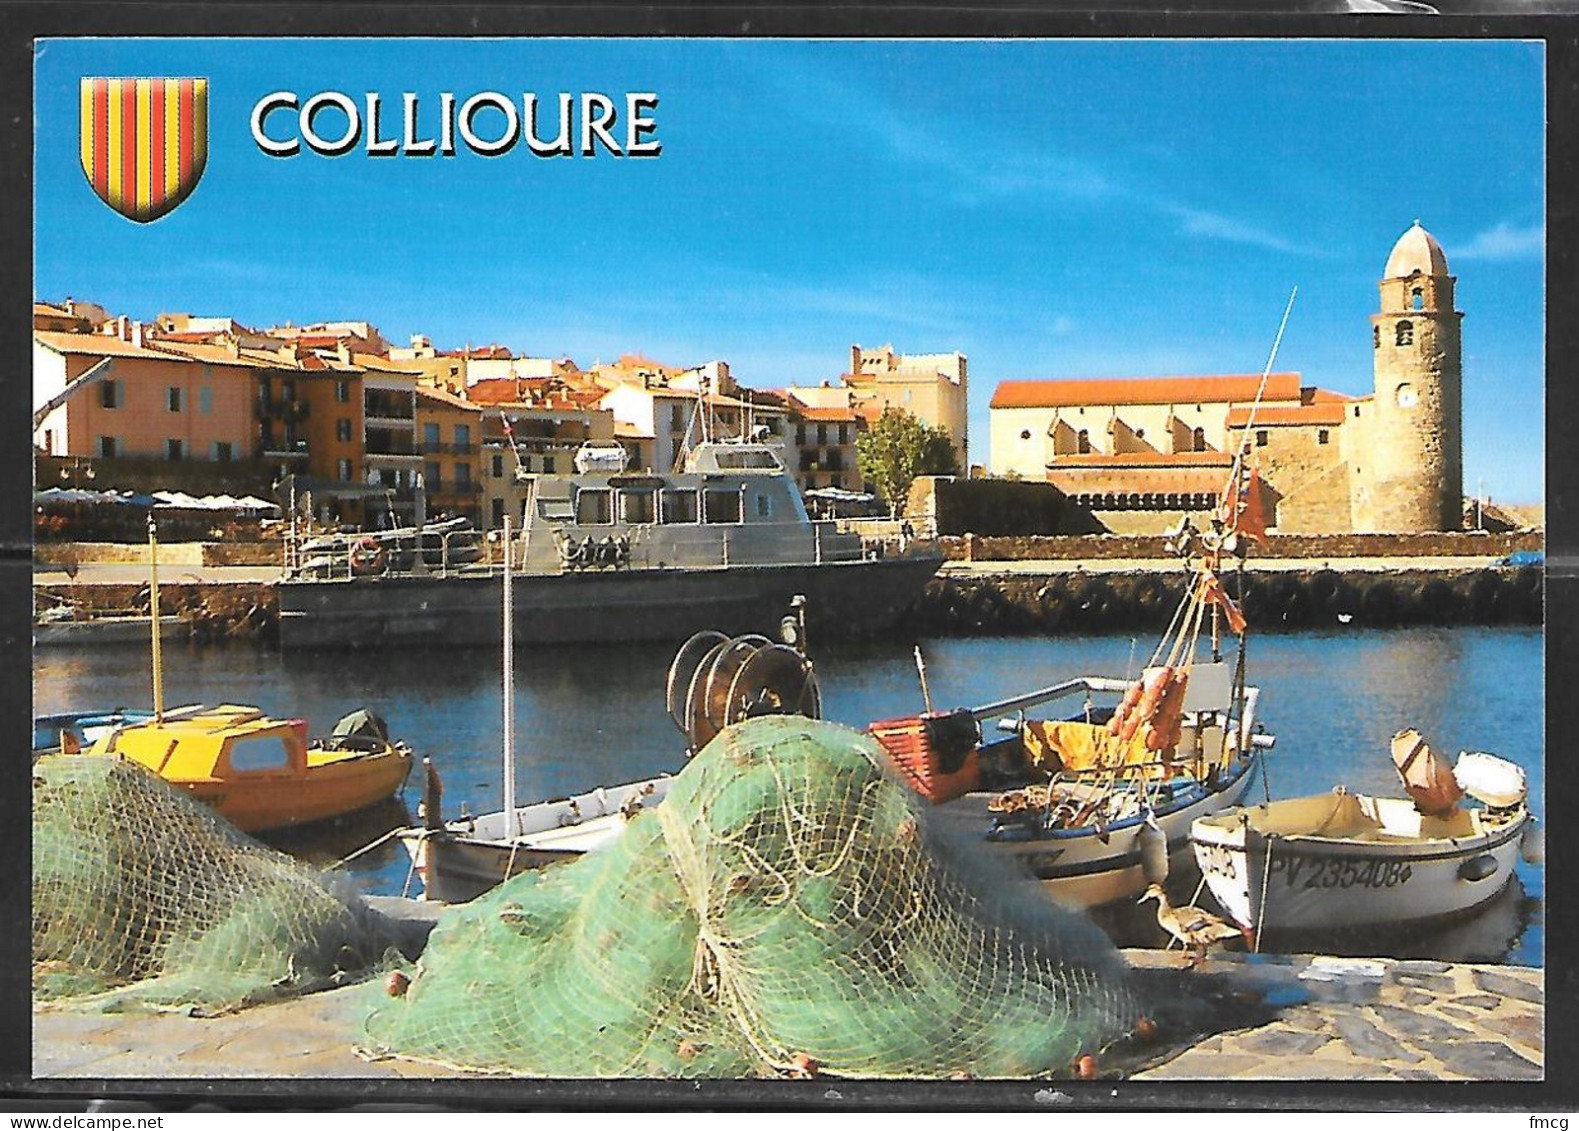 Collioure, France, Fishing Boat, Nets, Writing On Back - Collioure